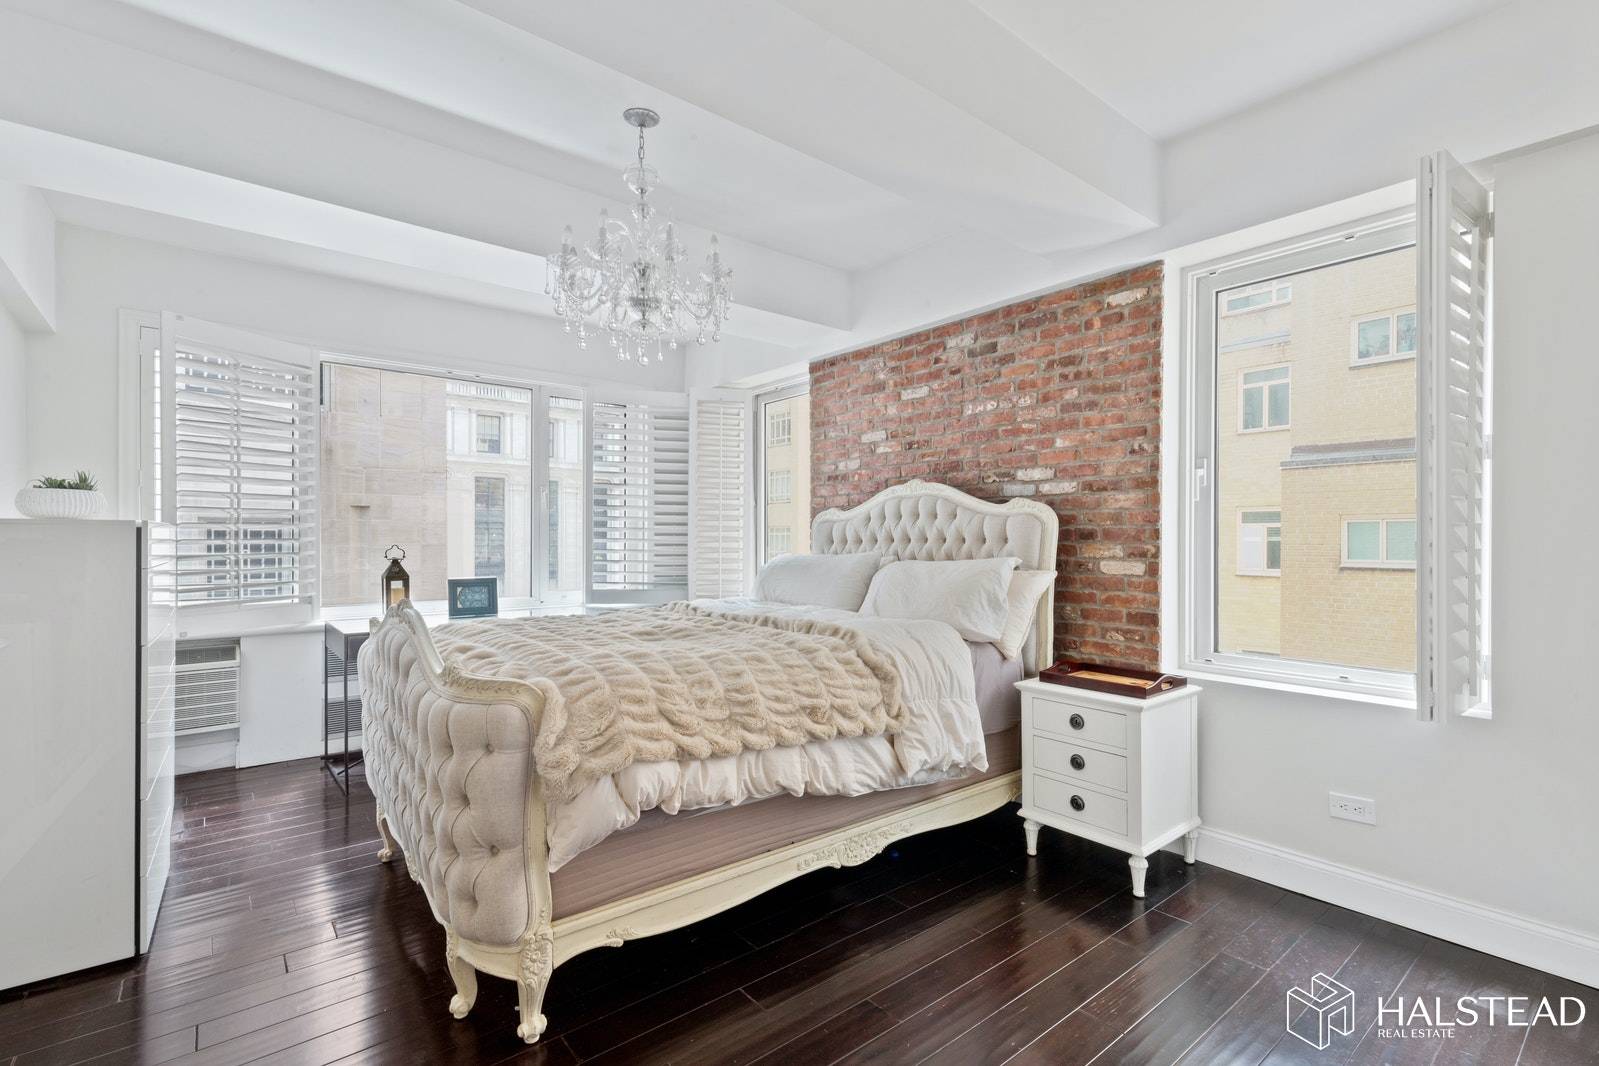 Located on arguably New York's most iconic street, Southmoor House is a Top white glove Cond Op not a land lease that allows LLCs, foreign buyers, students, pied a terre, ...